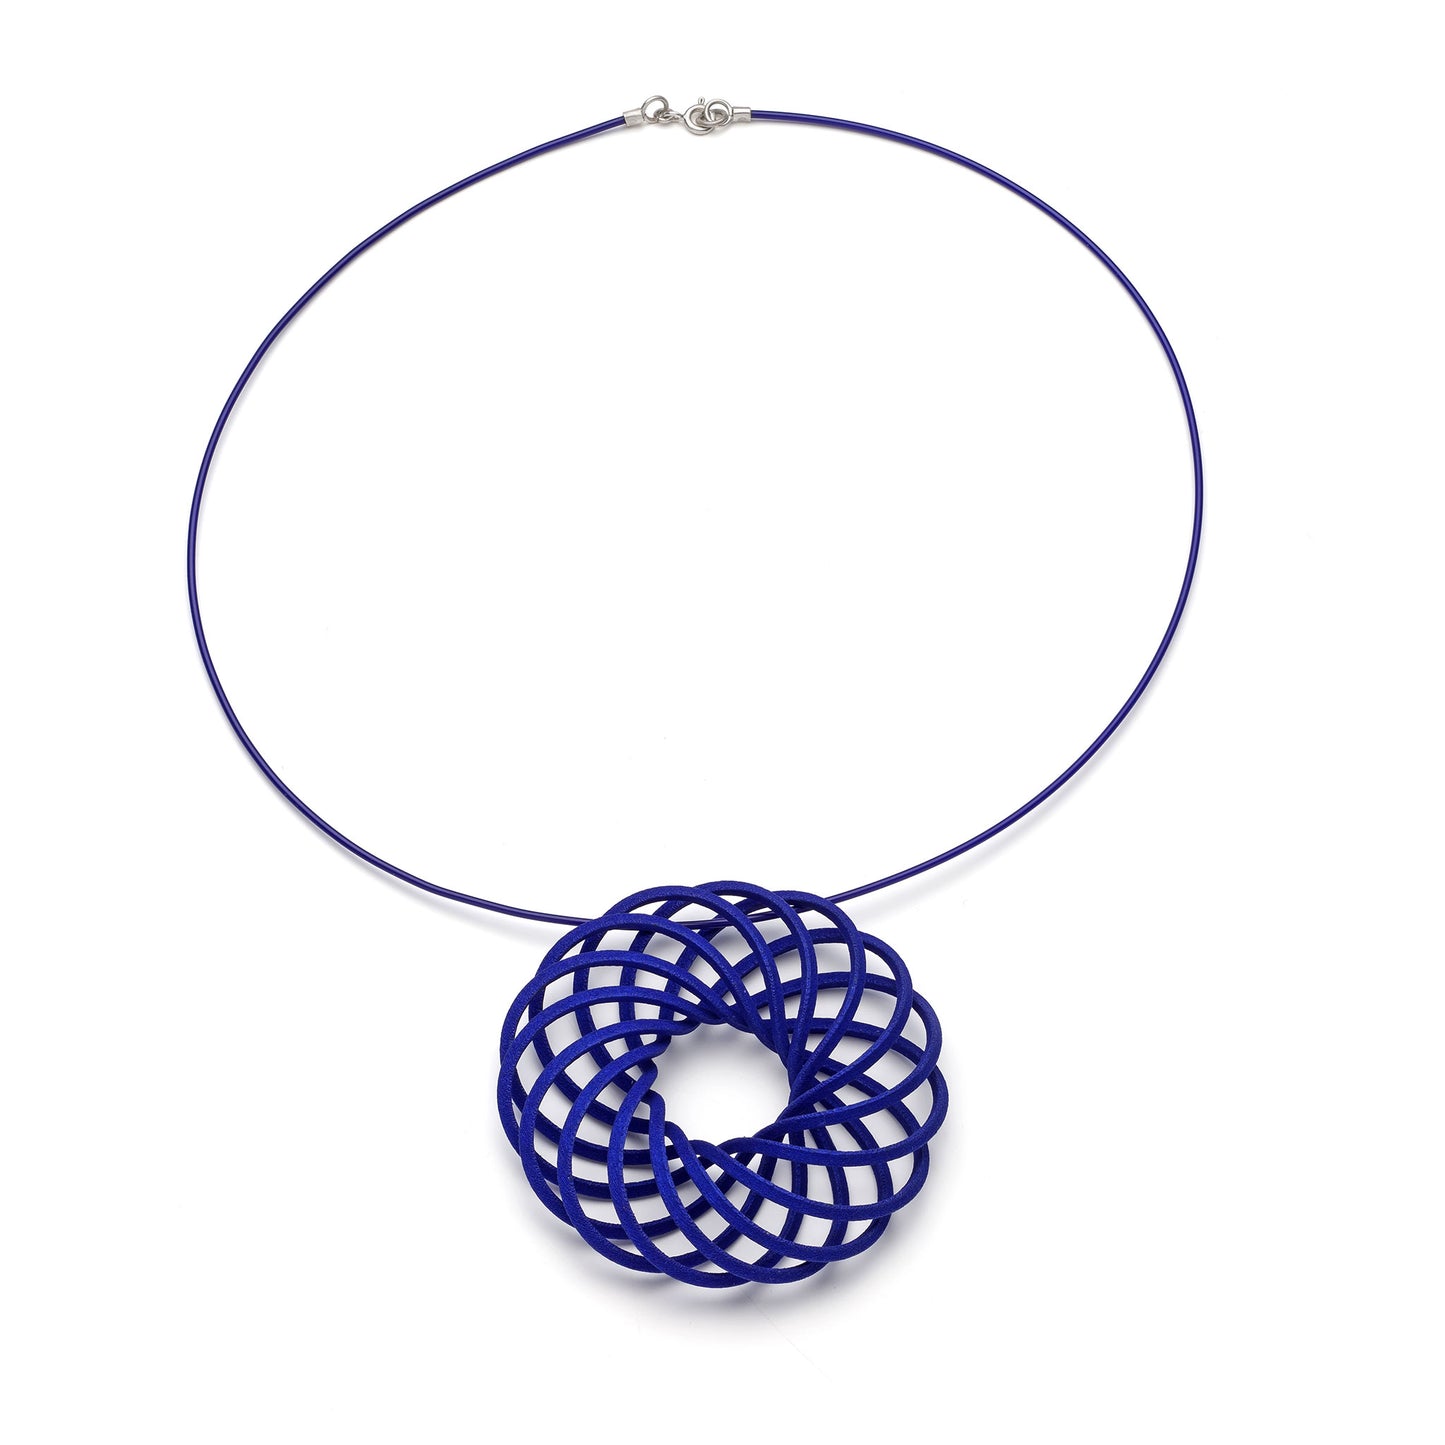 Large blue 3D printed vortex pendant by Katy Luxton